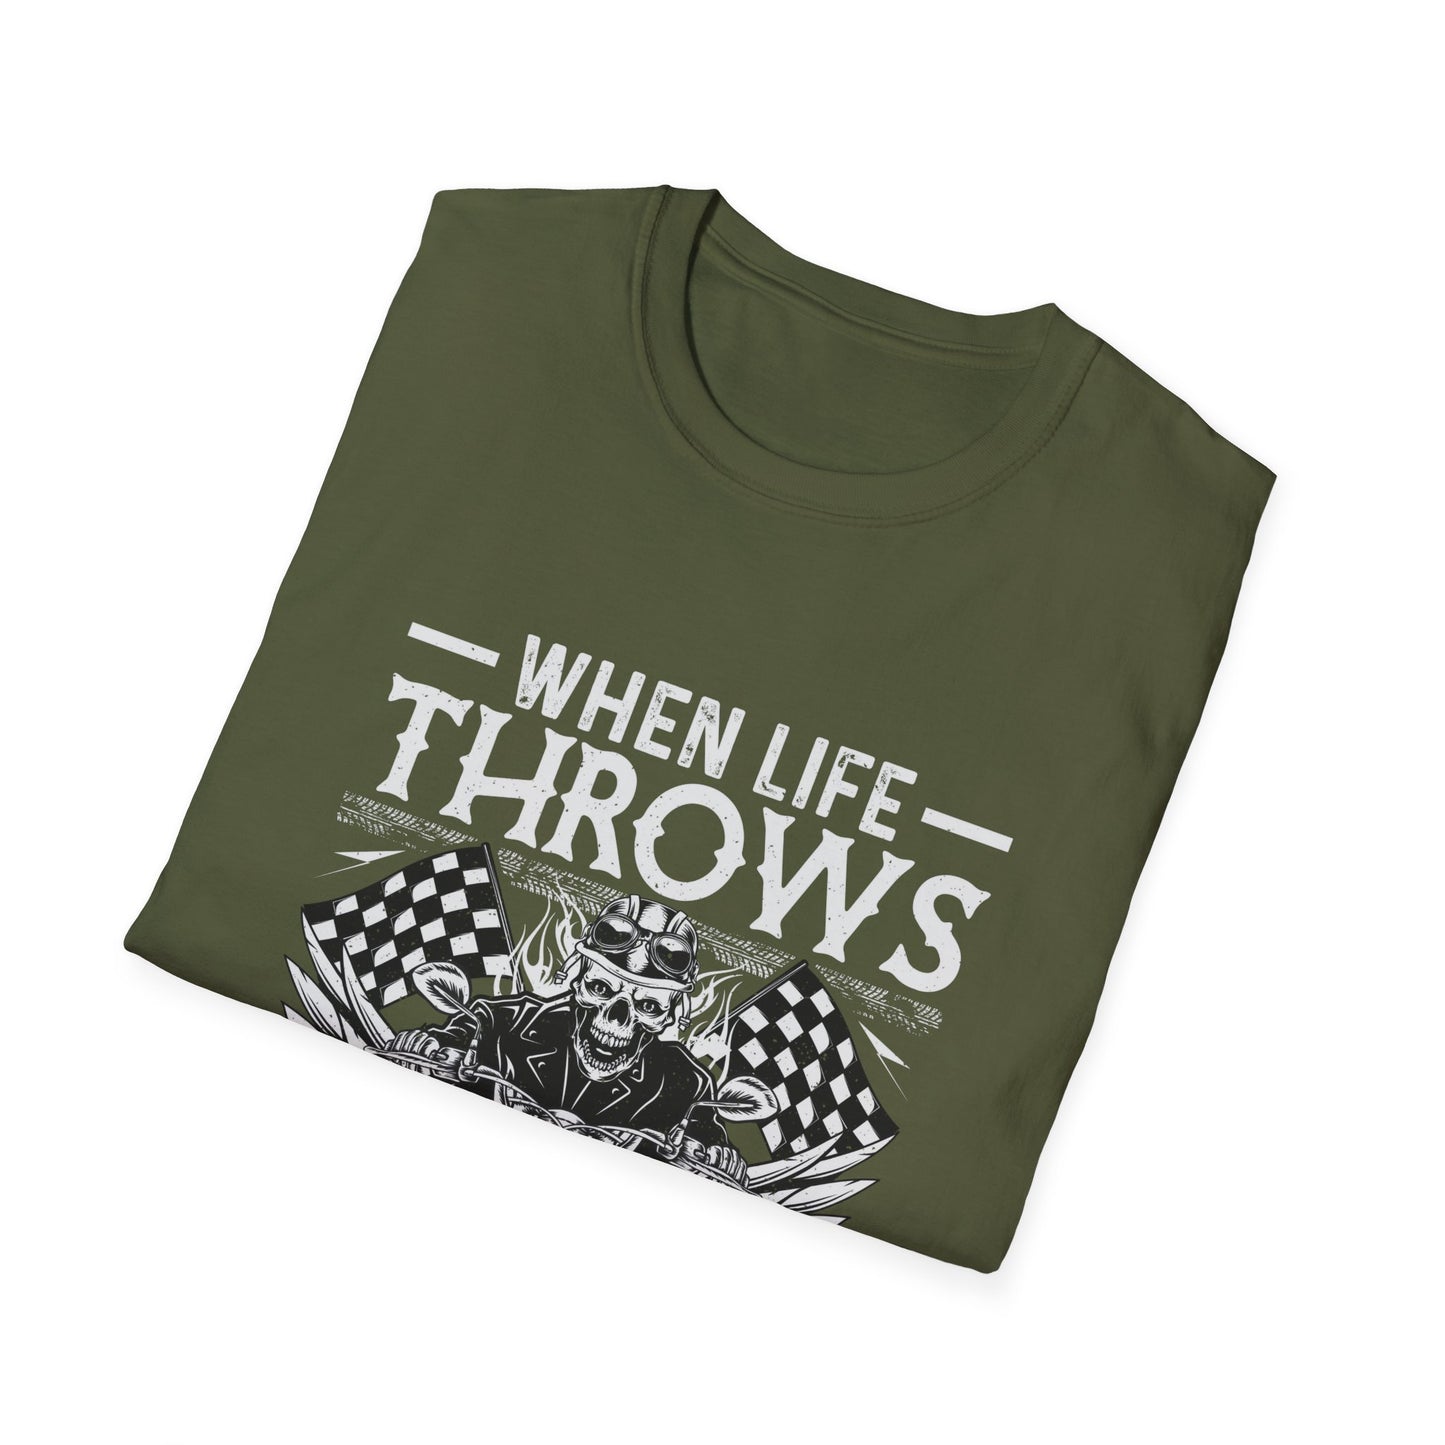 When life throws you a curve - Softstyle T-Shirt